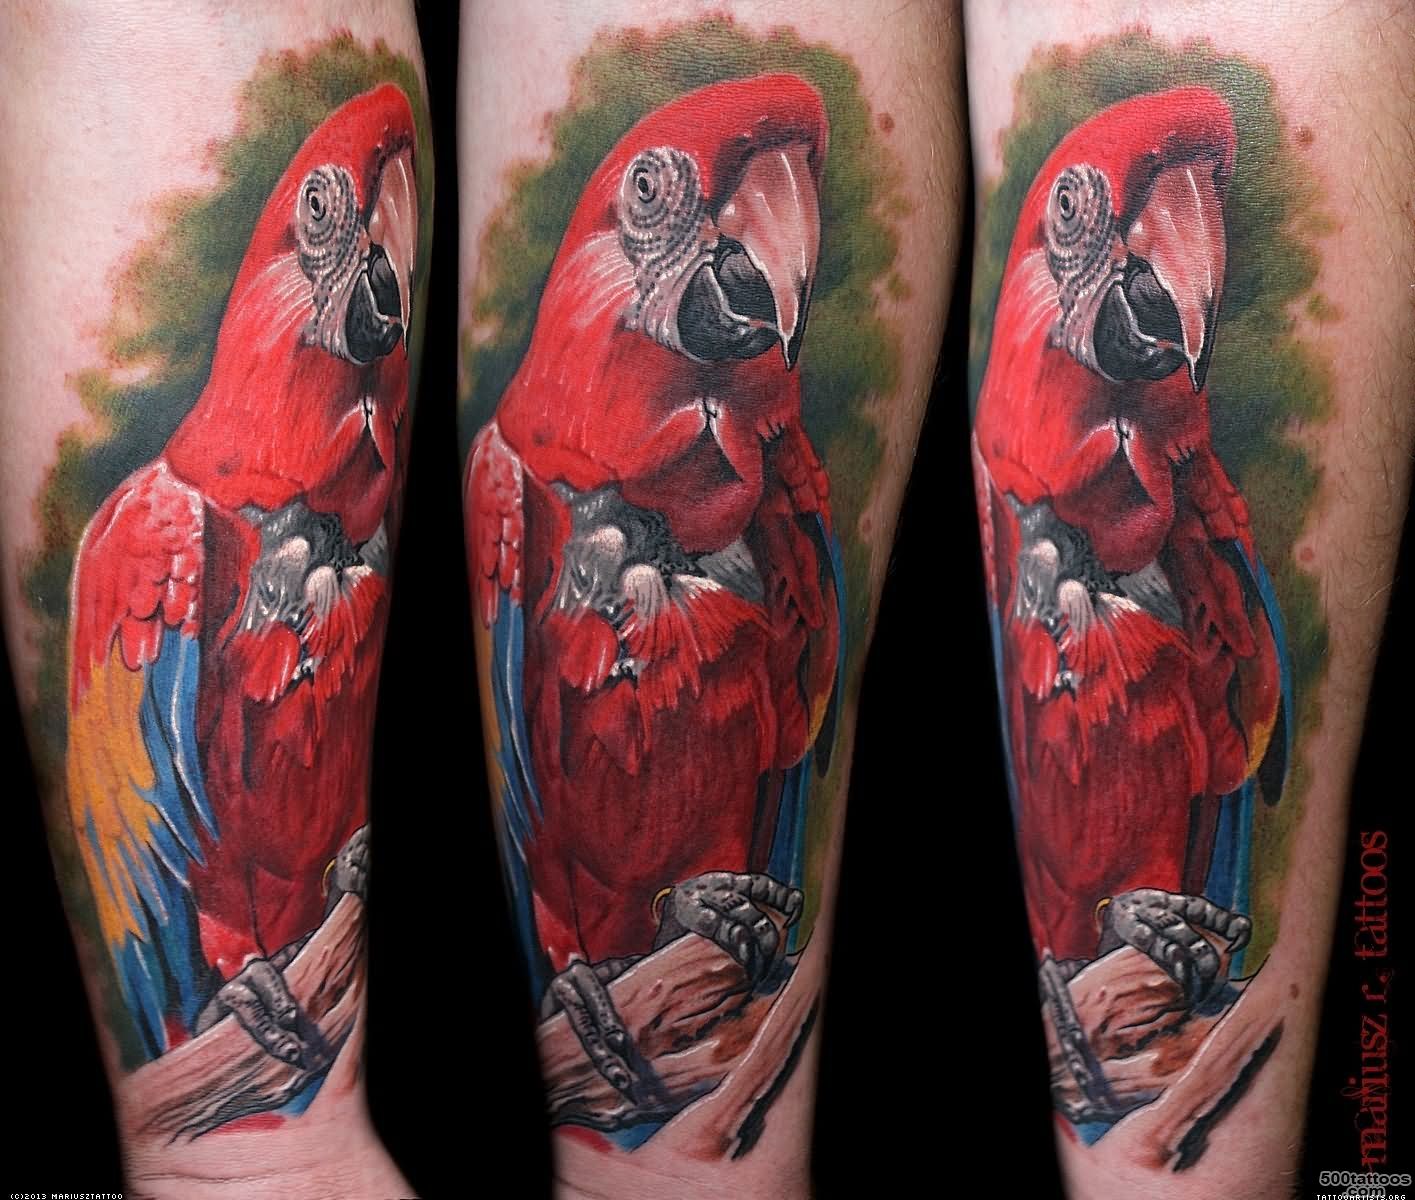 Parrot Tattoo Images amp Designs_24